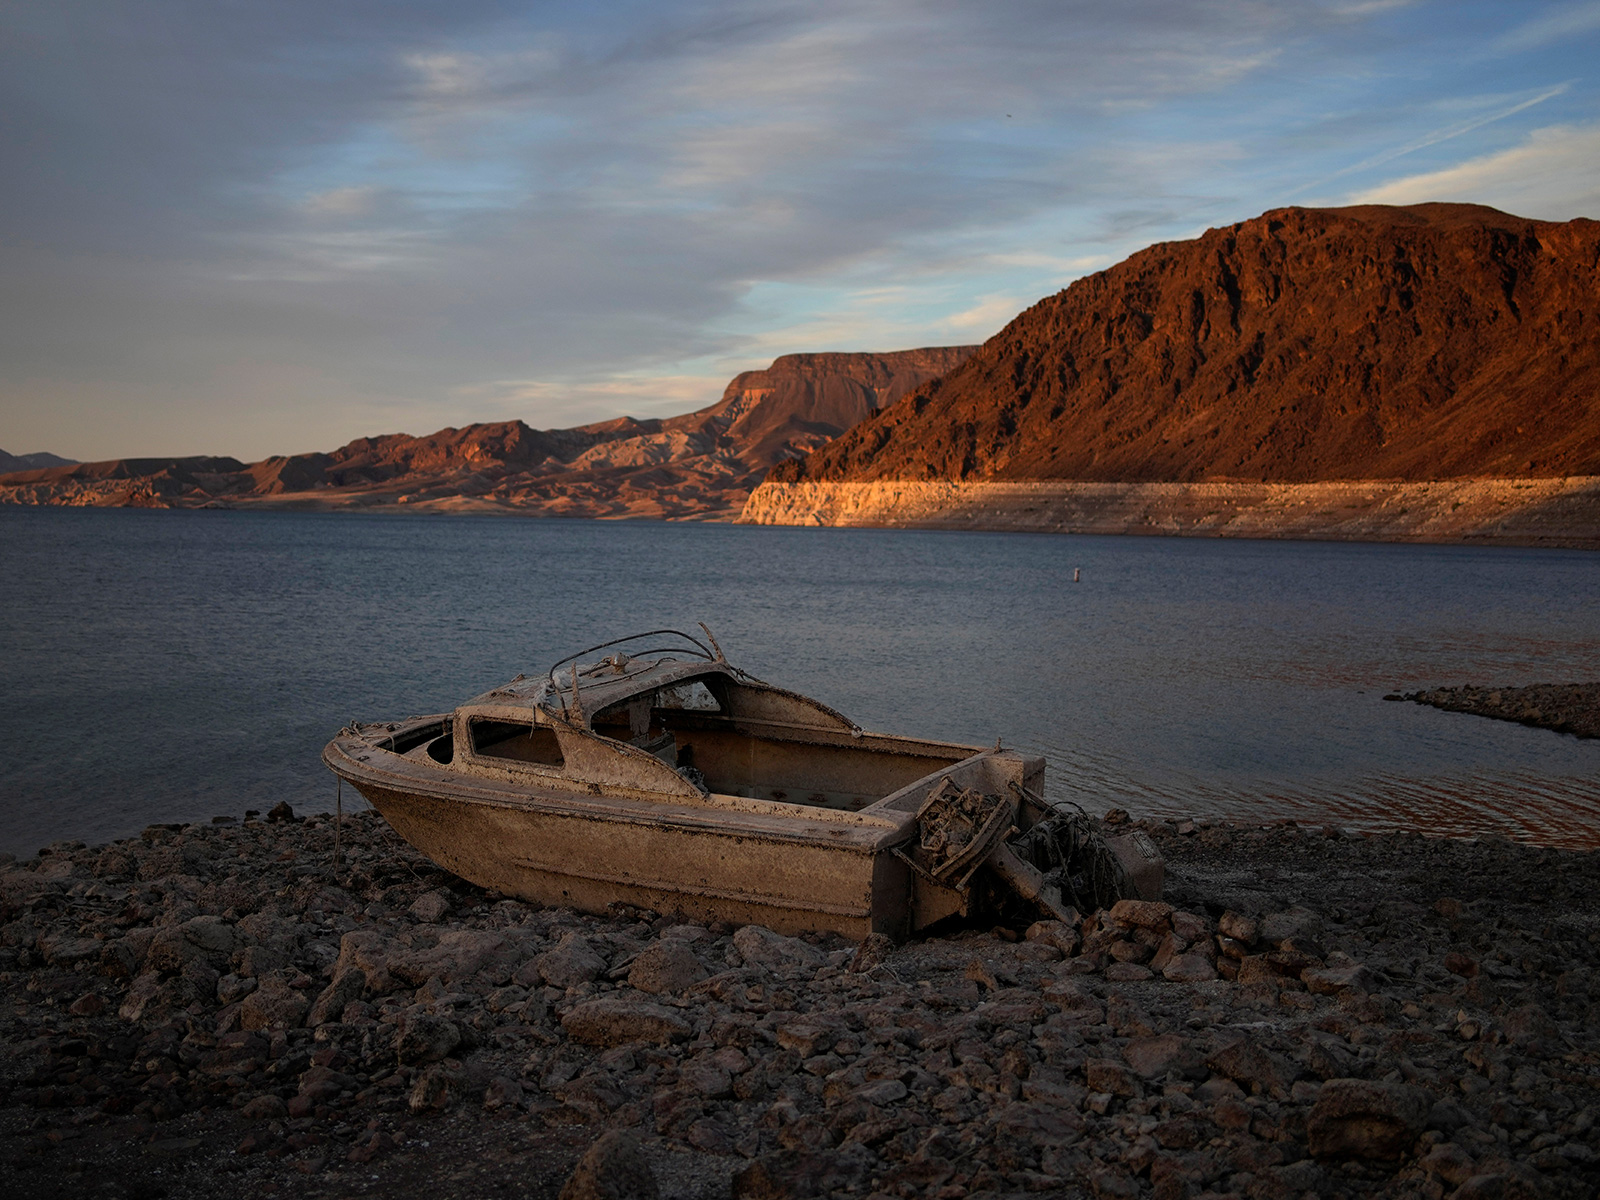 human remains found lake mead - photo #24